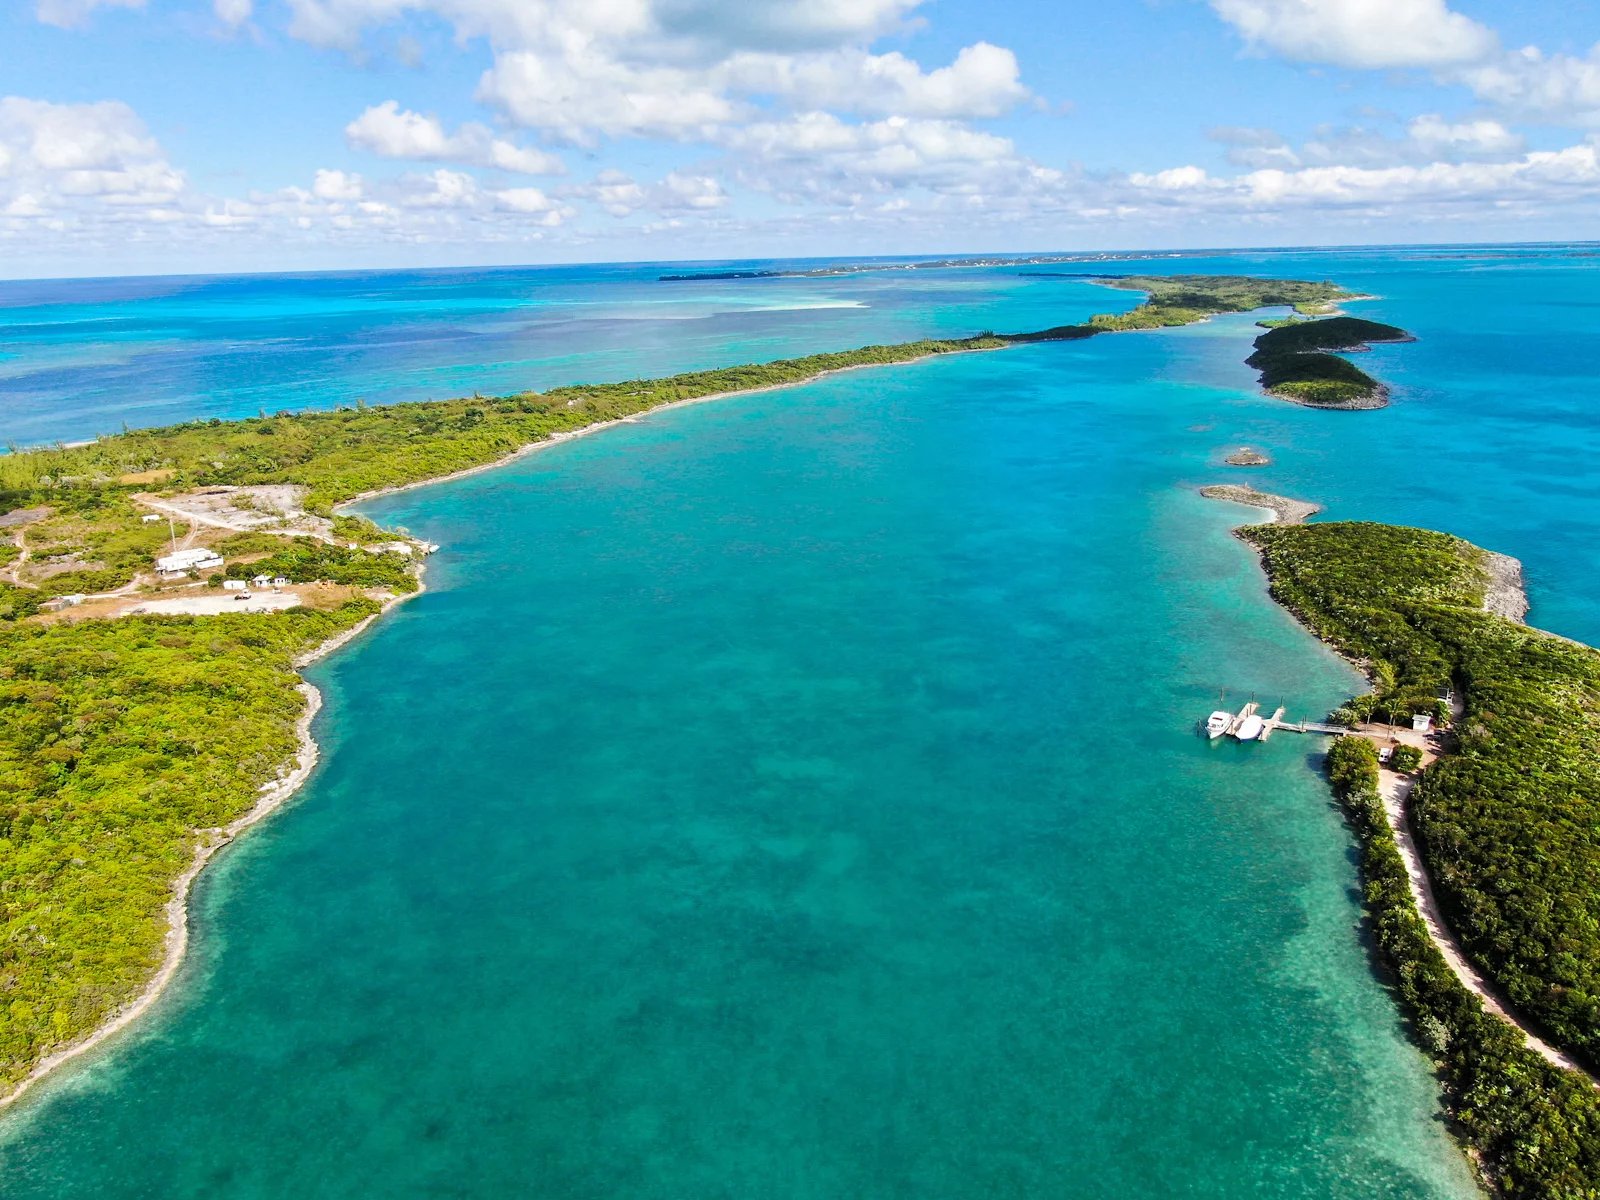 royal island, the perfect private island opportunity - mls 51444 image5